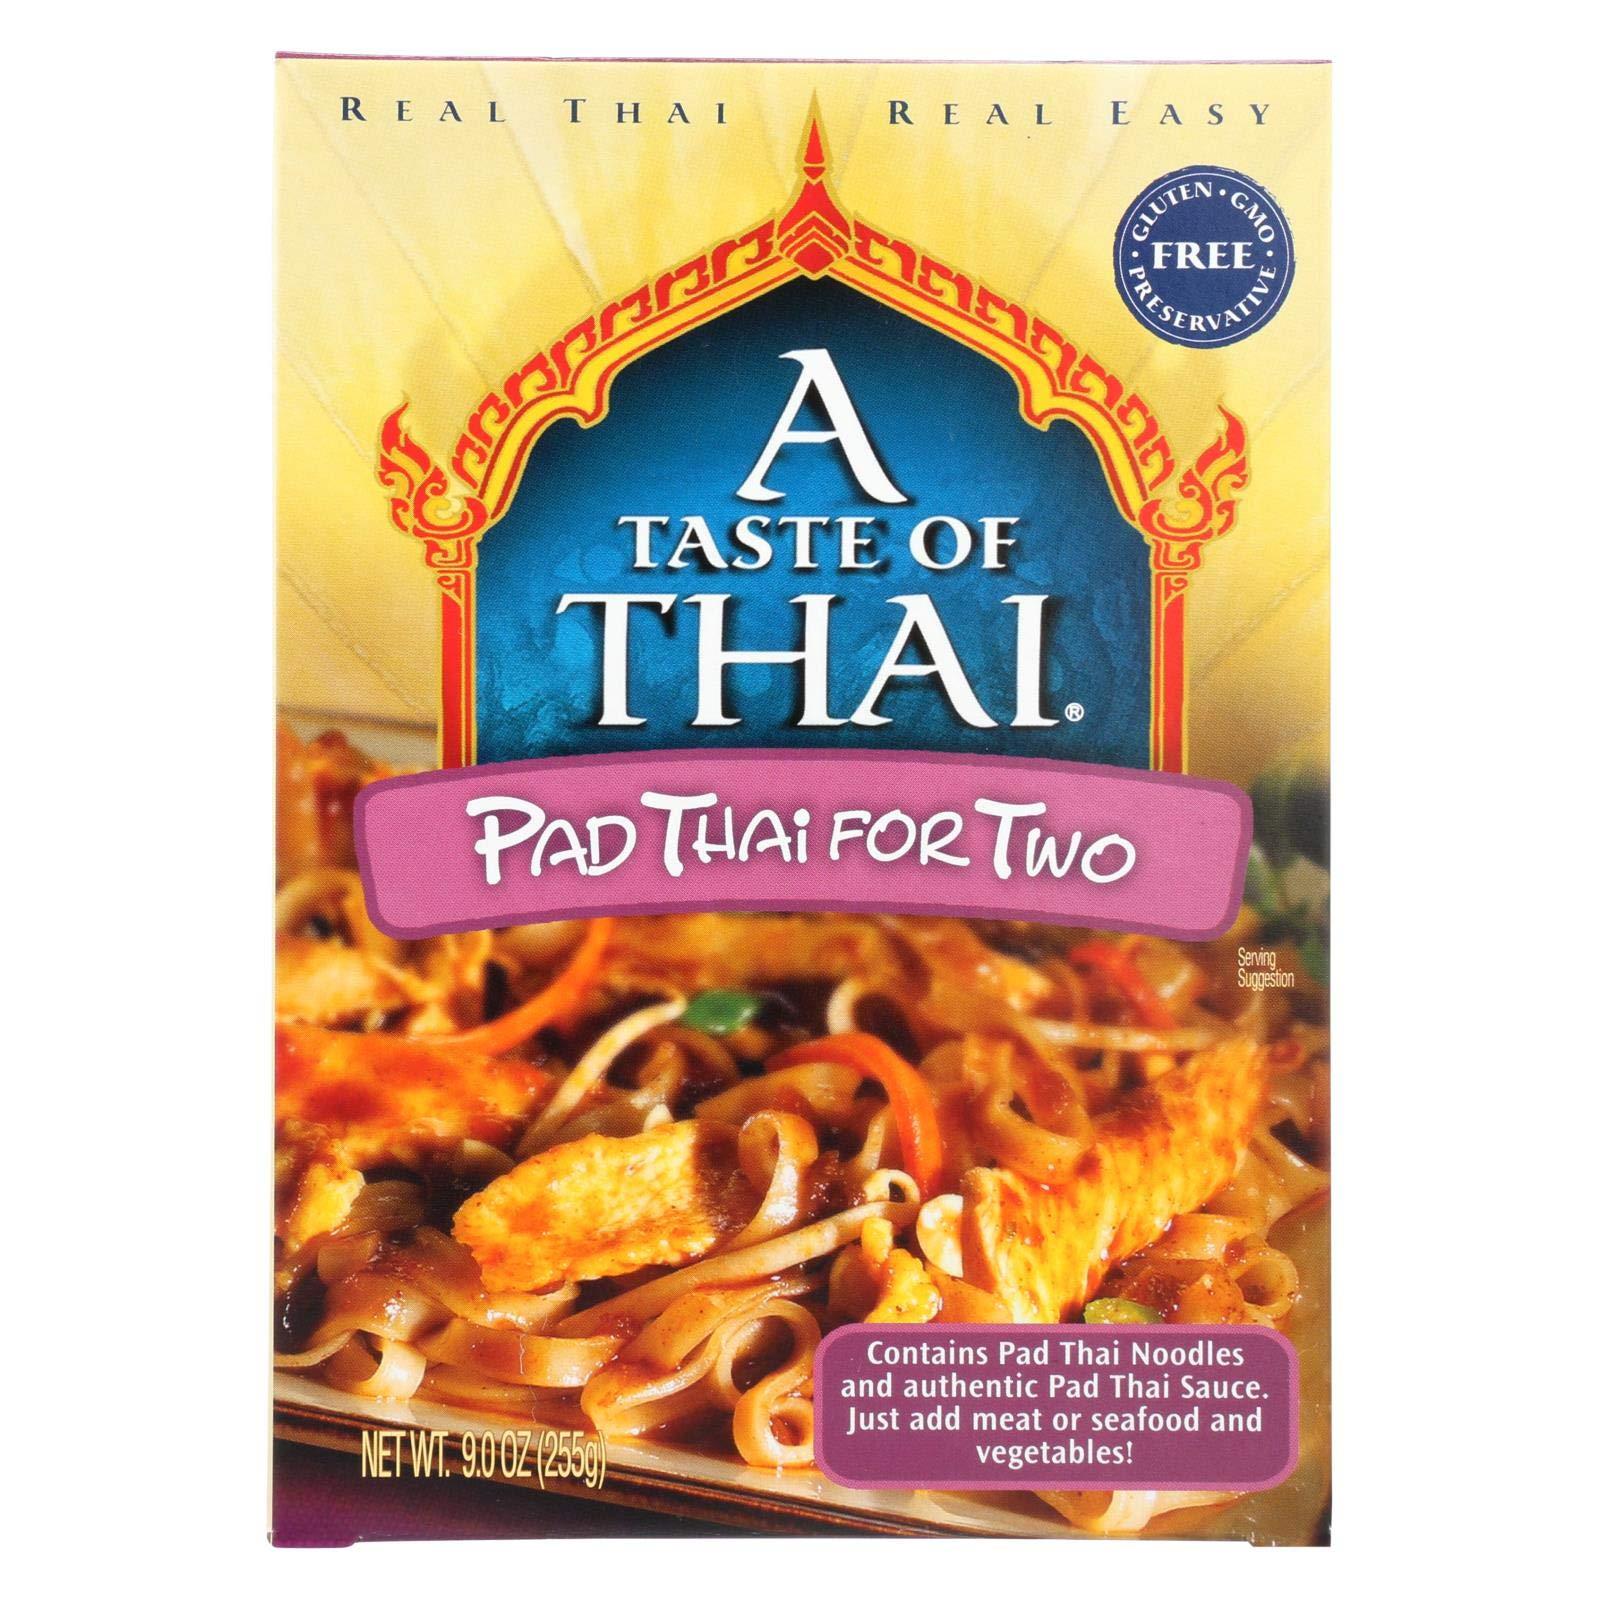 A Taste of Thai Pad Thai for Two Mix, 9oz (Pack of 6) Heat & Eat Kit Includes Instant Noodles & Authentic Pad Thai Sauce, Gluten-Free